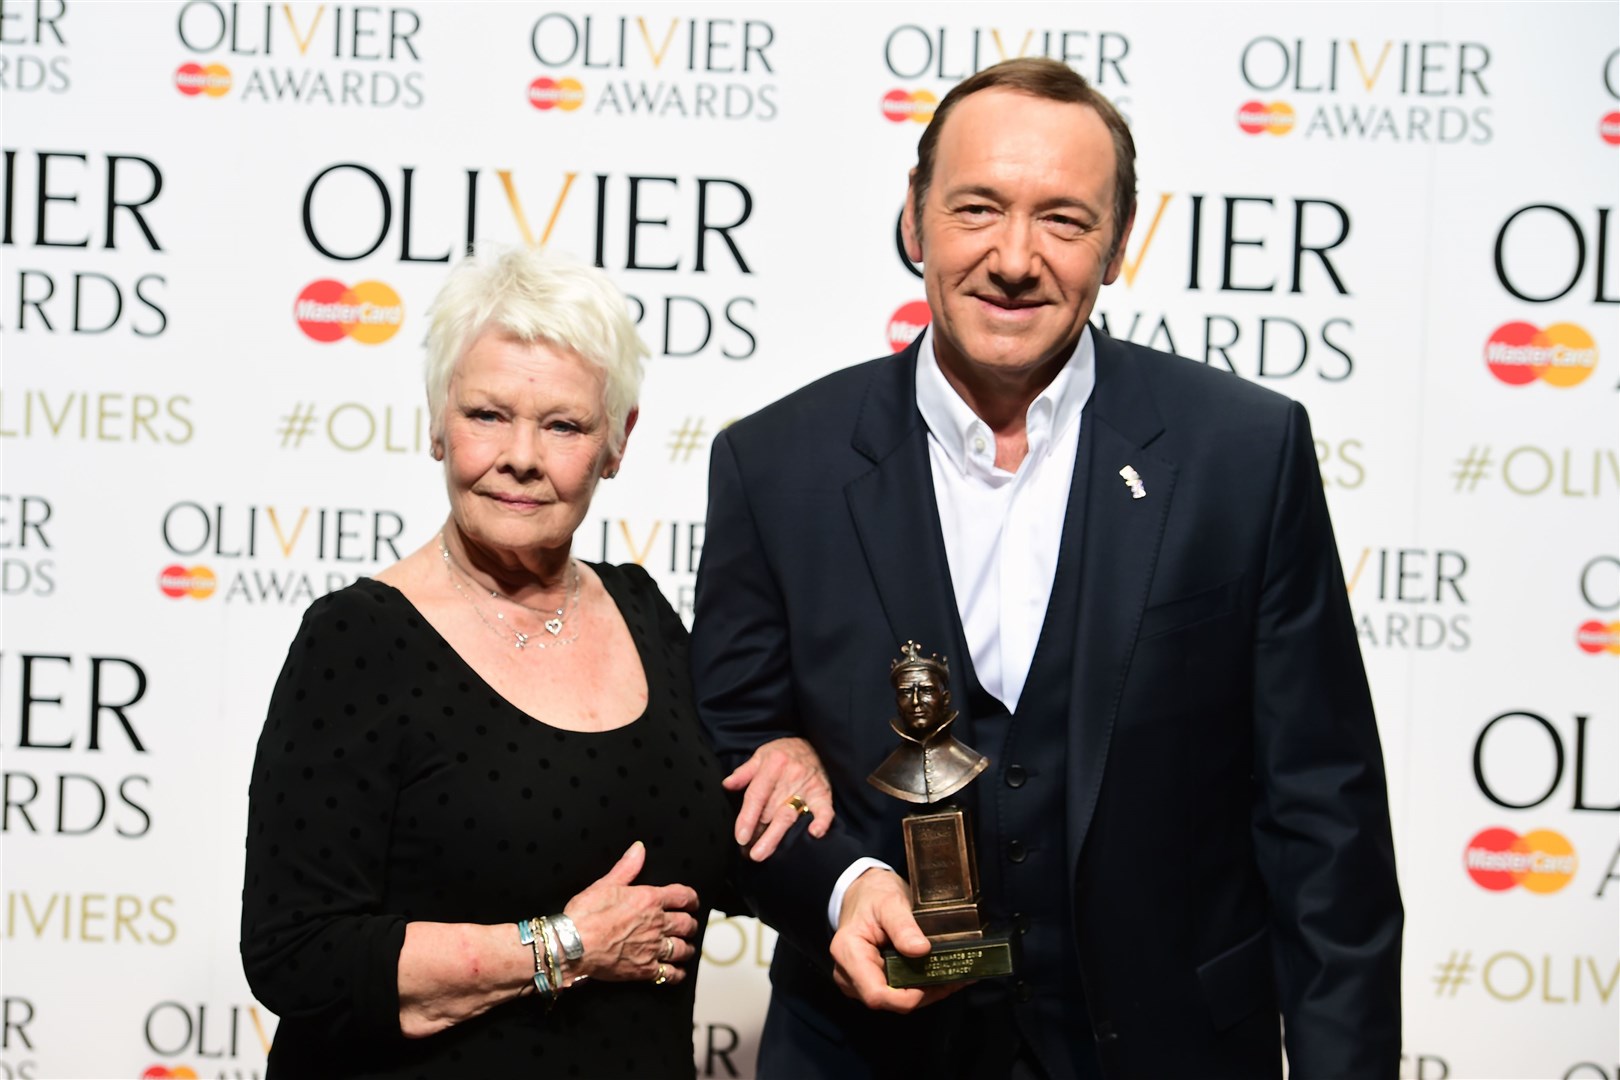 Dame Judi Dench and Kevin Spacey attending the Olivier Awards in 2015 (PA)